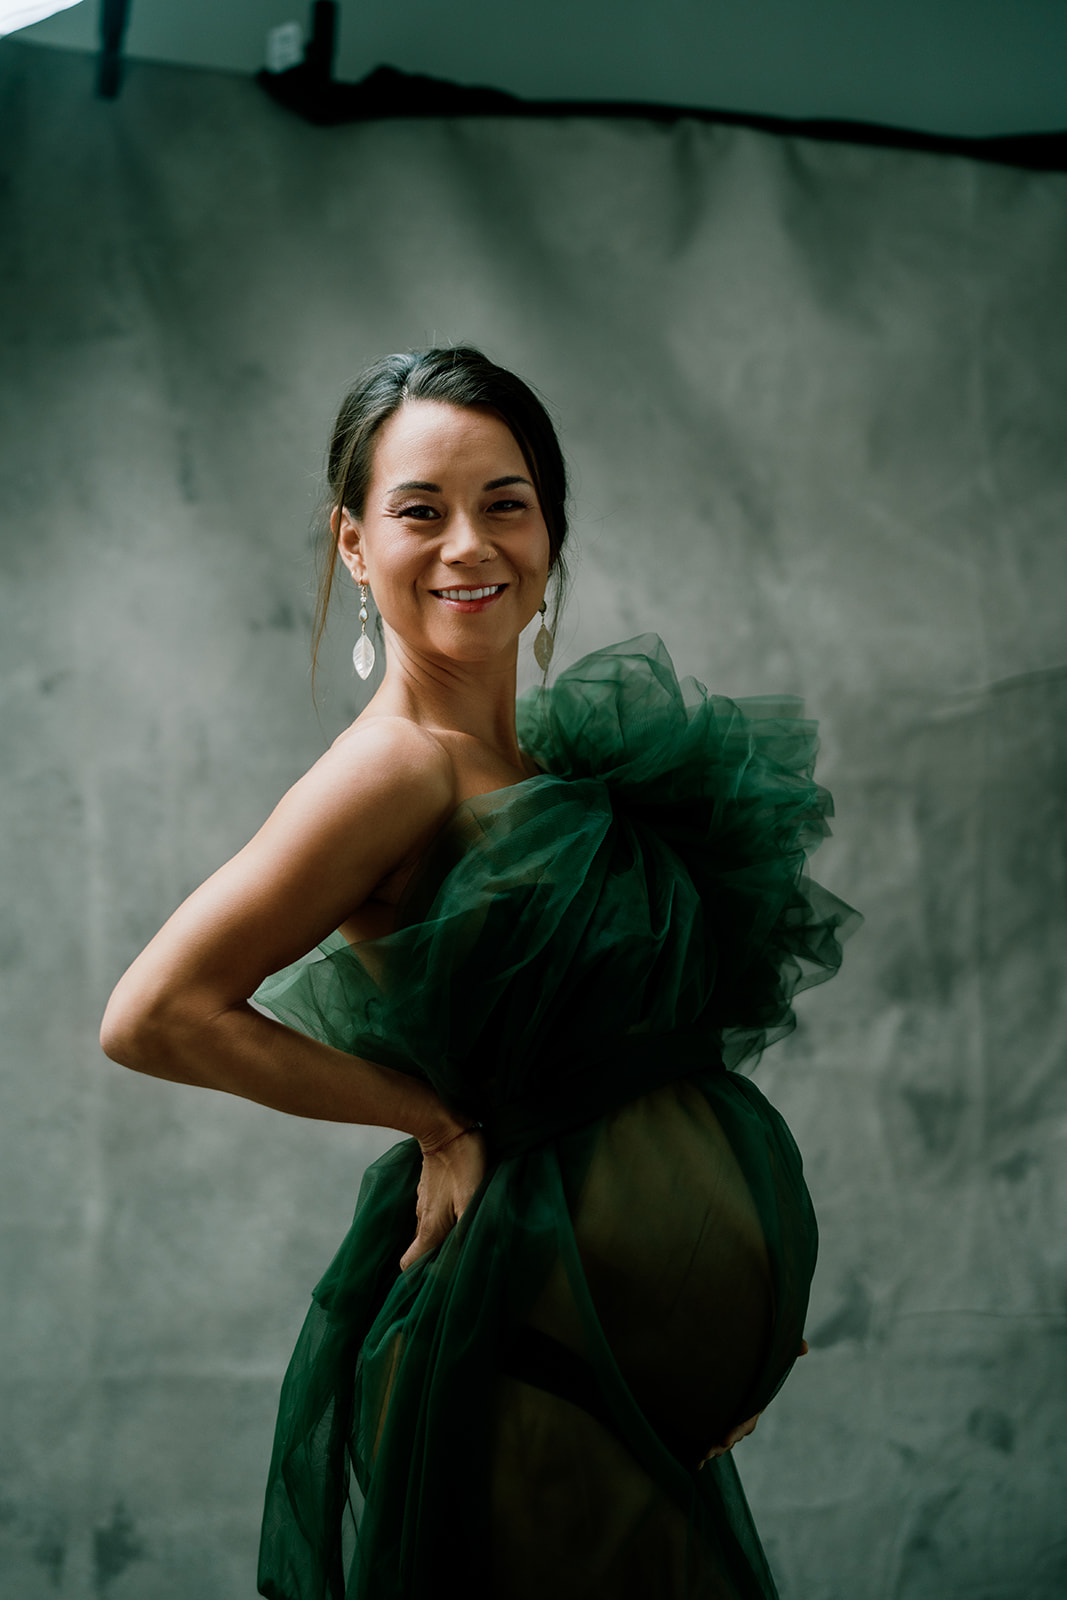 A pregnant woman smiling towards the camera in a green dress posing for a photo.